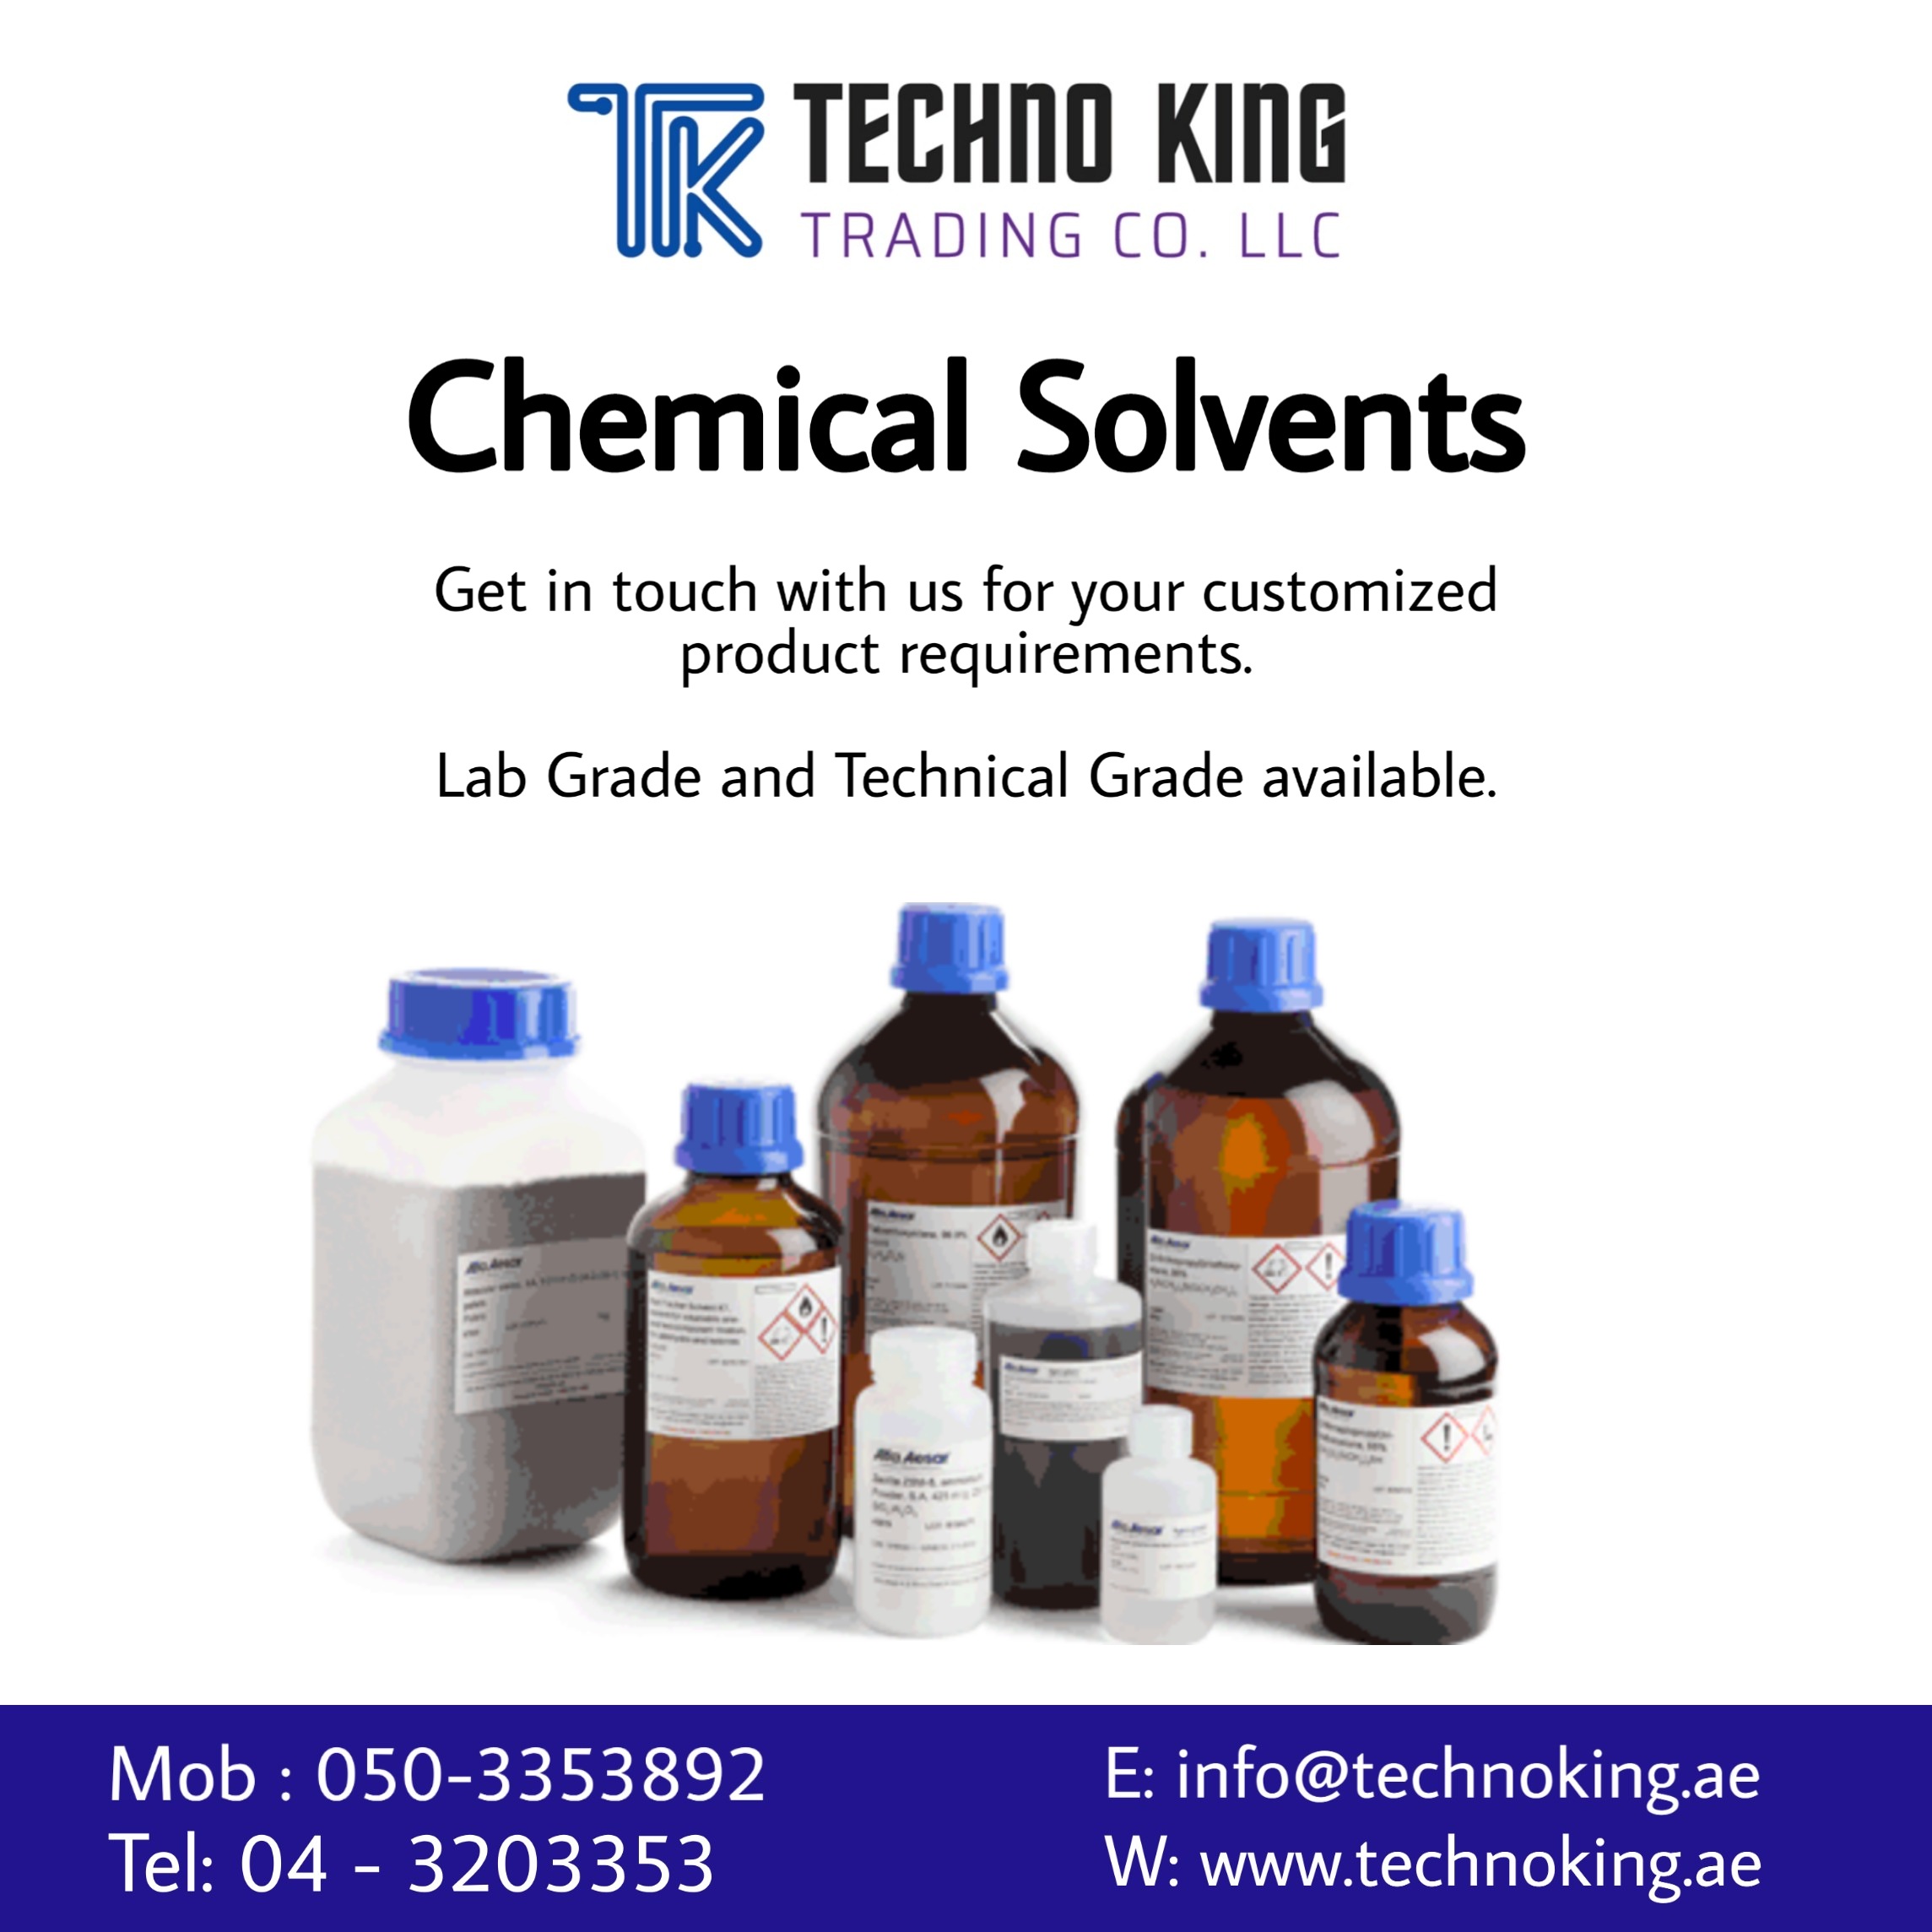 Industrial chemicals and solvents